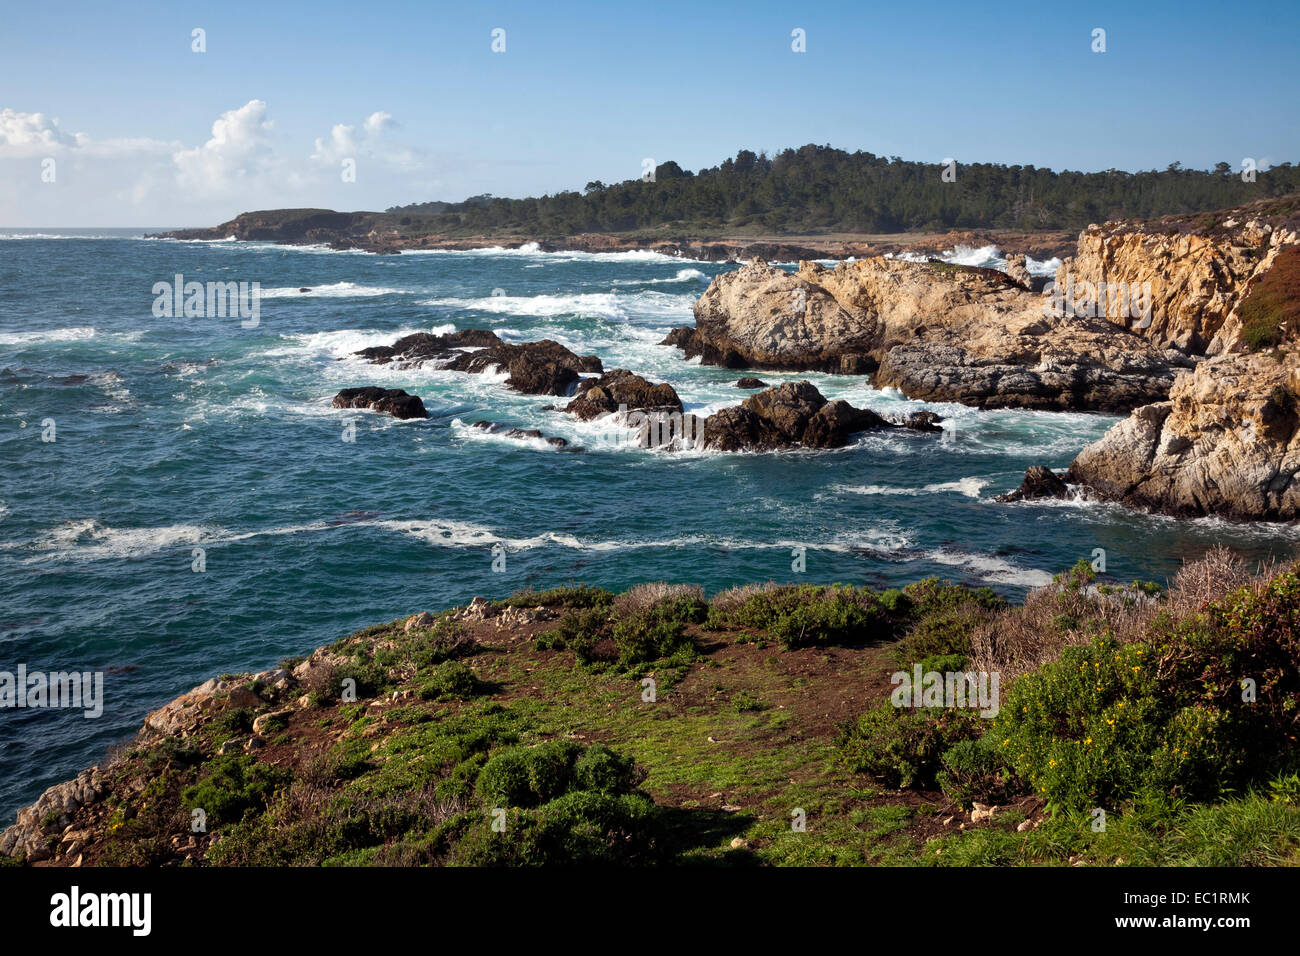 CA02463-00...CALIFORNIA - View north along the coastline from the Bird Island Trailhead at Point Lobos State Reserve. Stock Photo